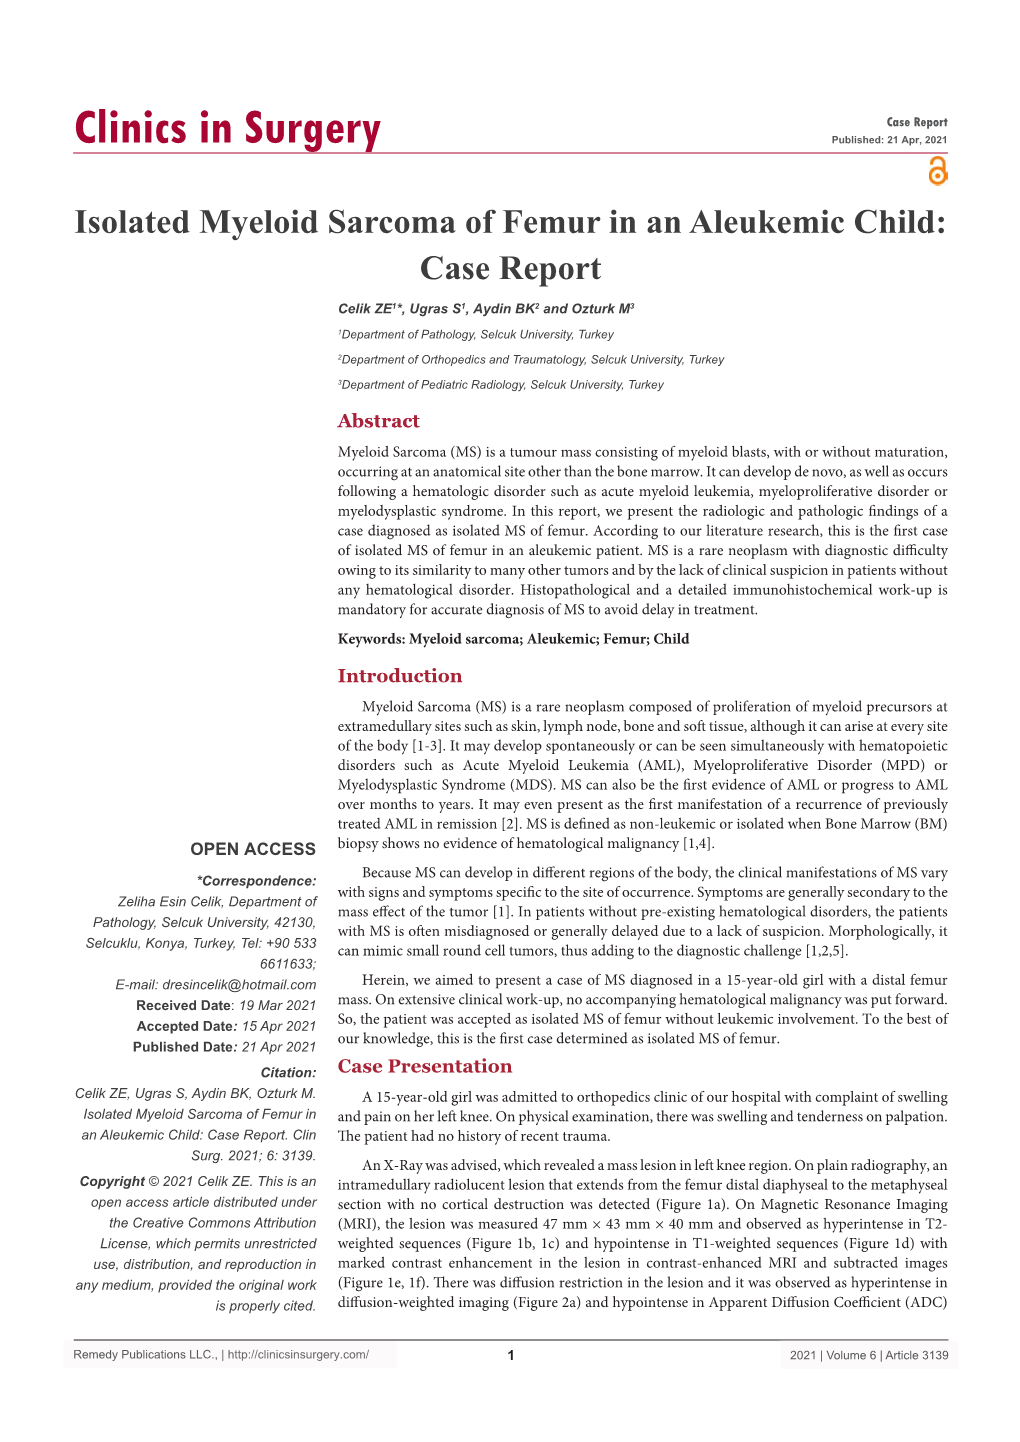 Isolated Myeloid Sarcoma of Femur in an Aleukemic Child: Case Report